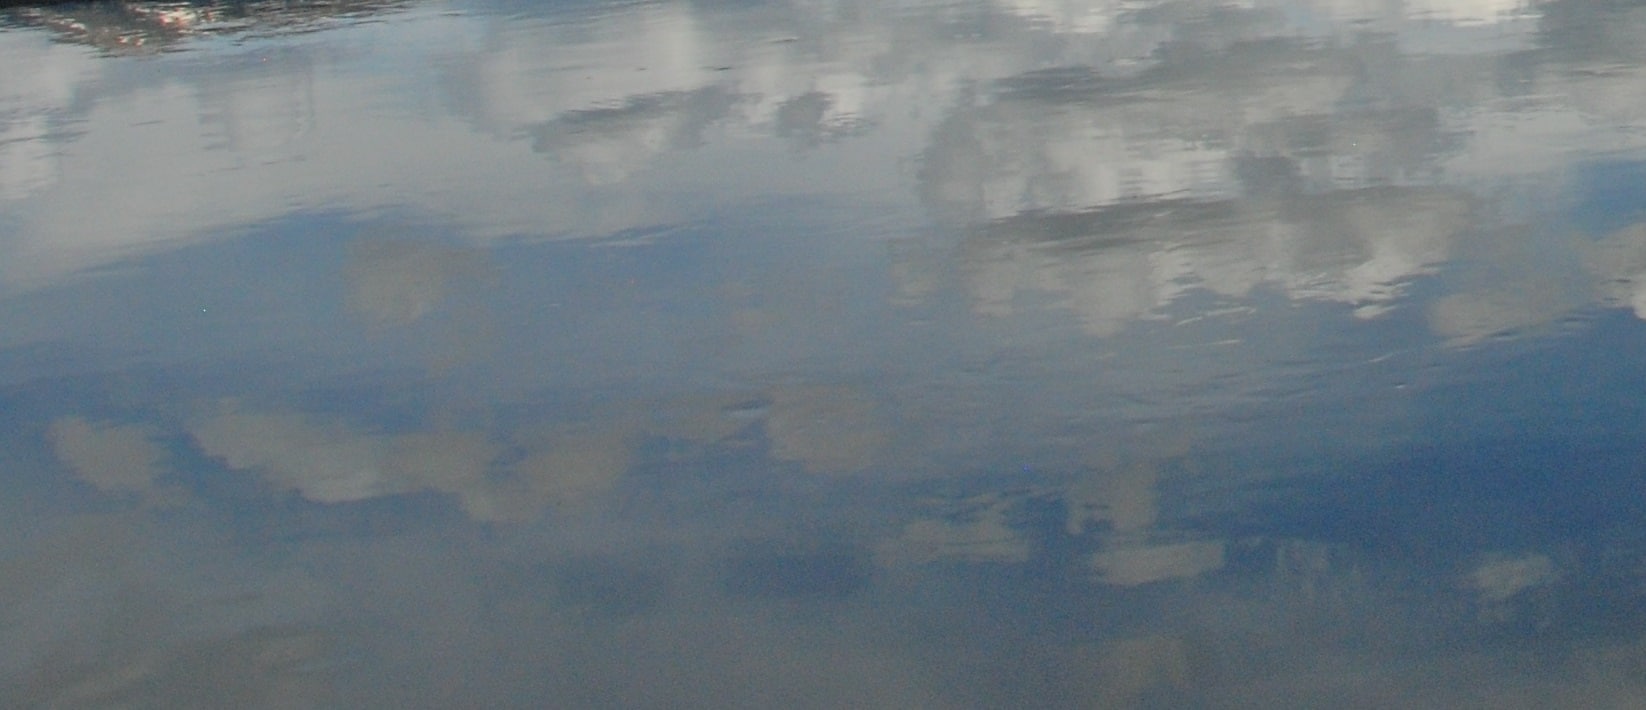 The sky with clouds is reflected in still water.